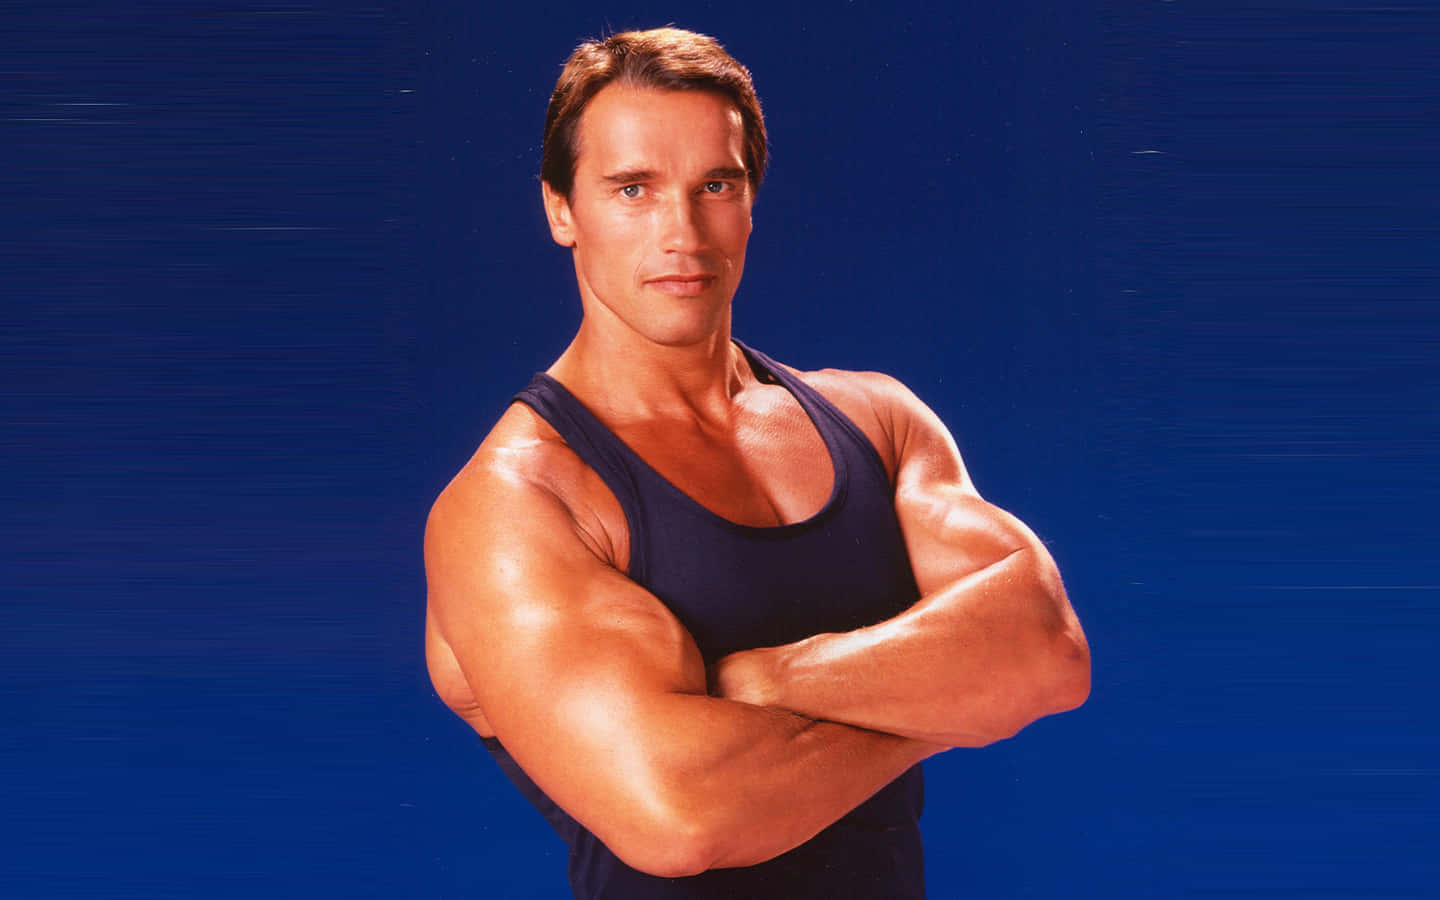 Arnold Schwarzenegger showing off his muscles